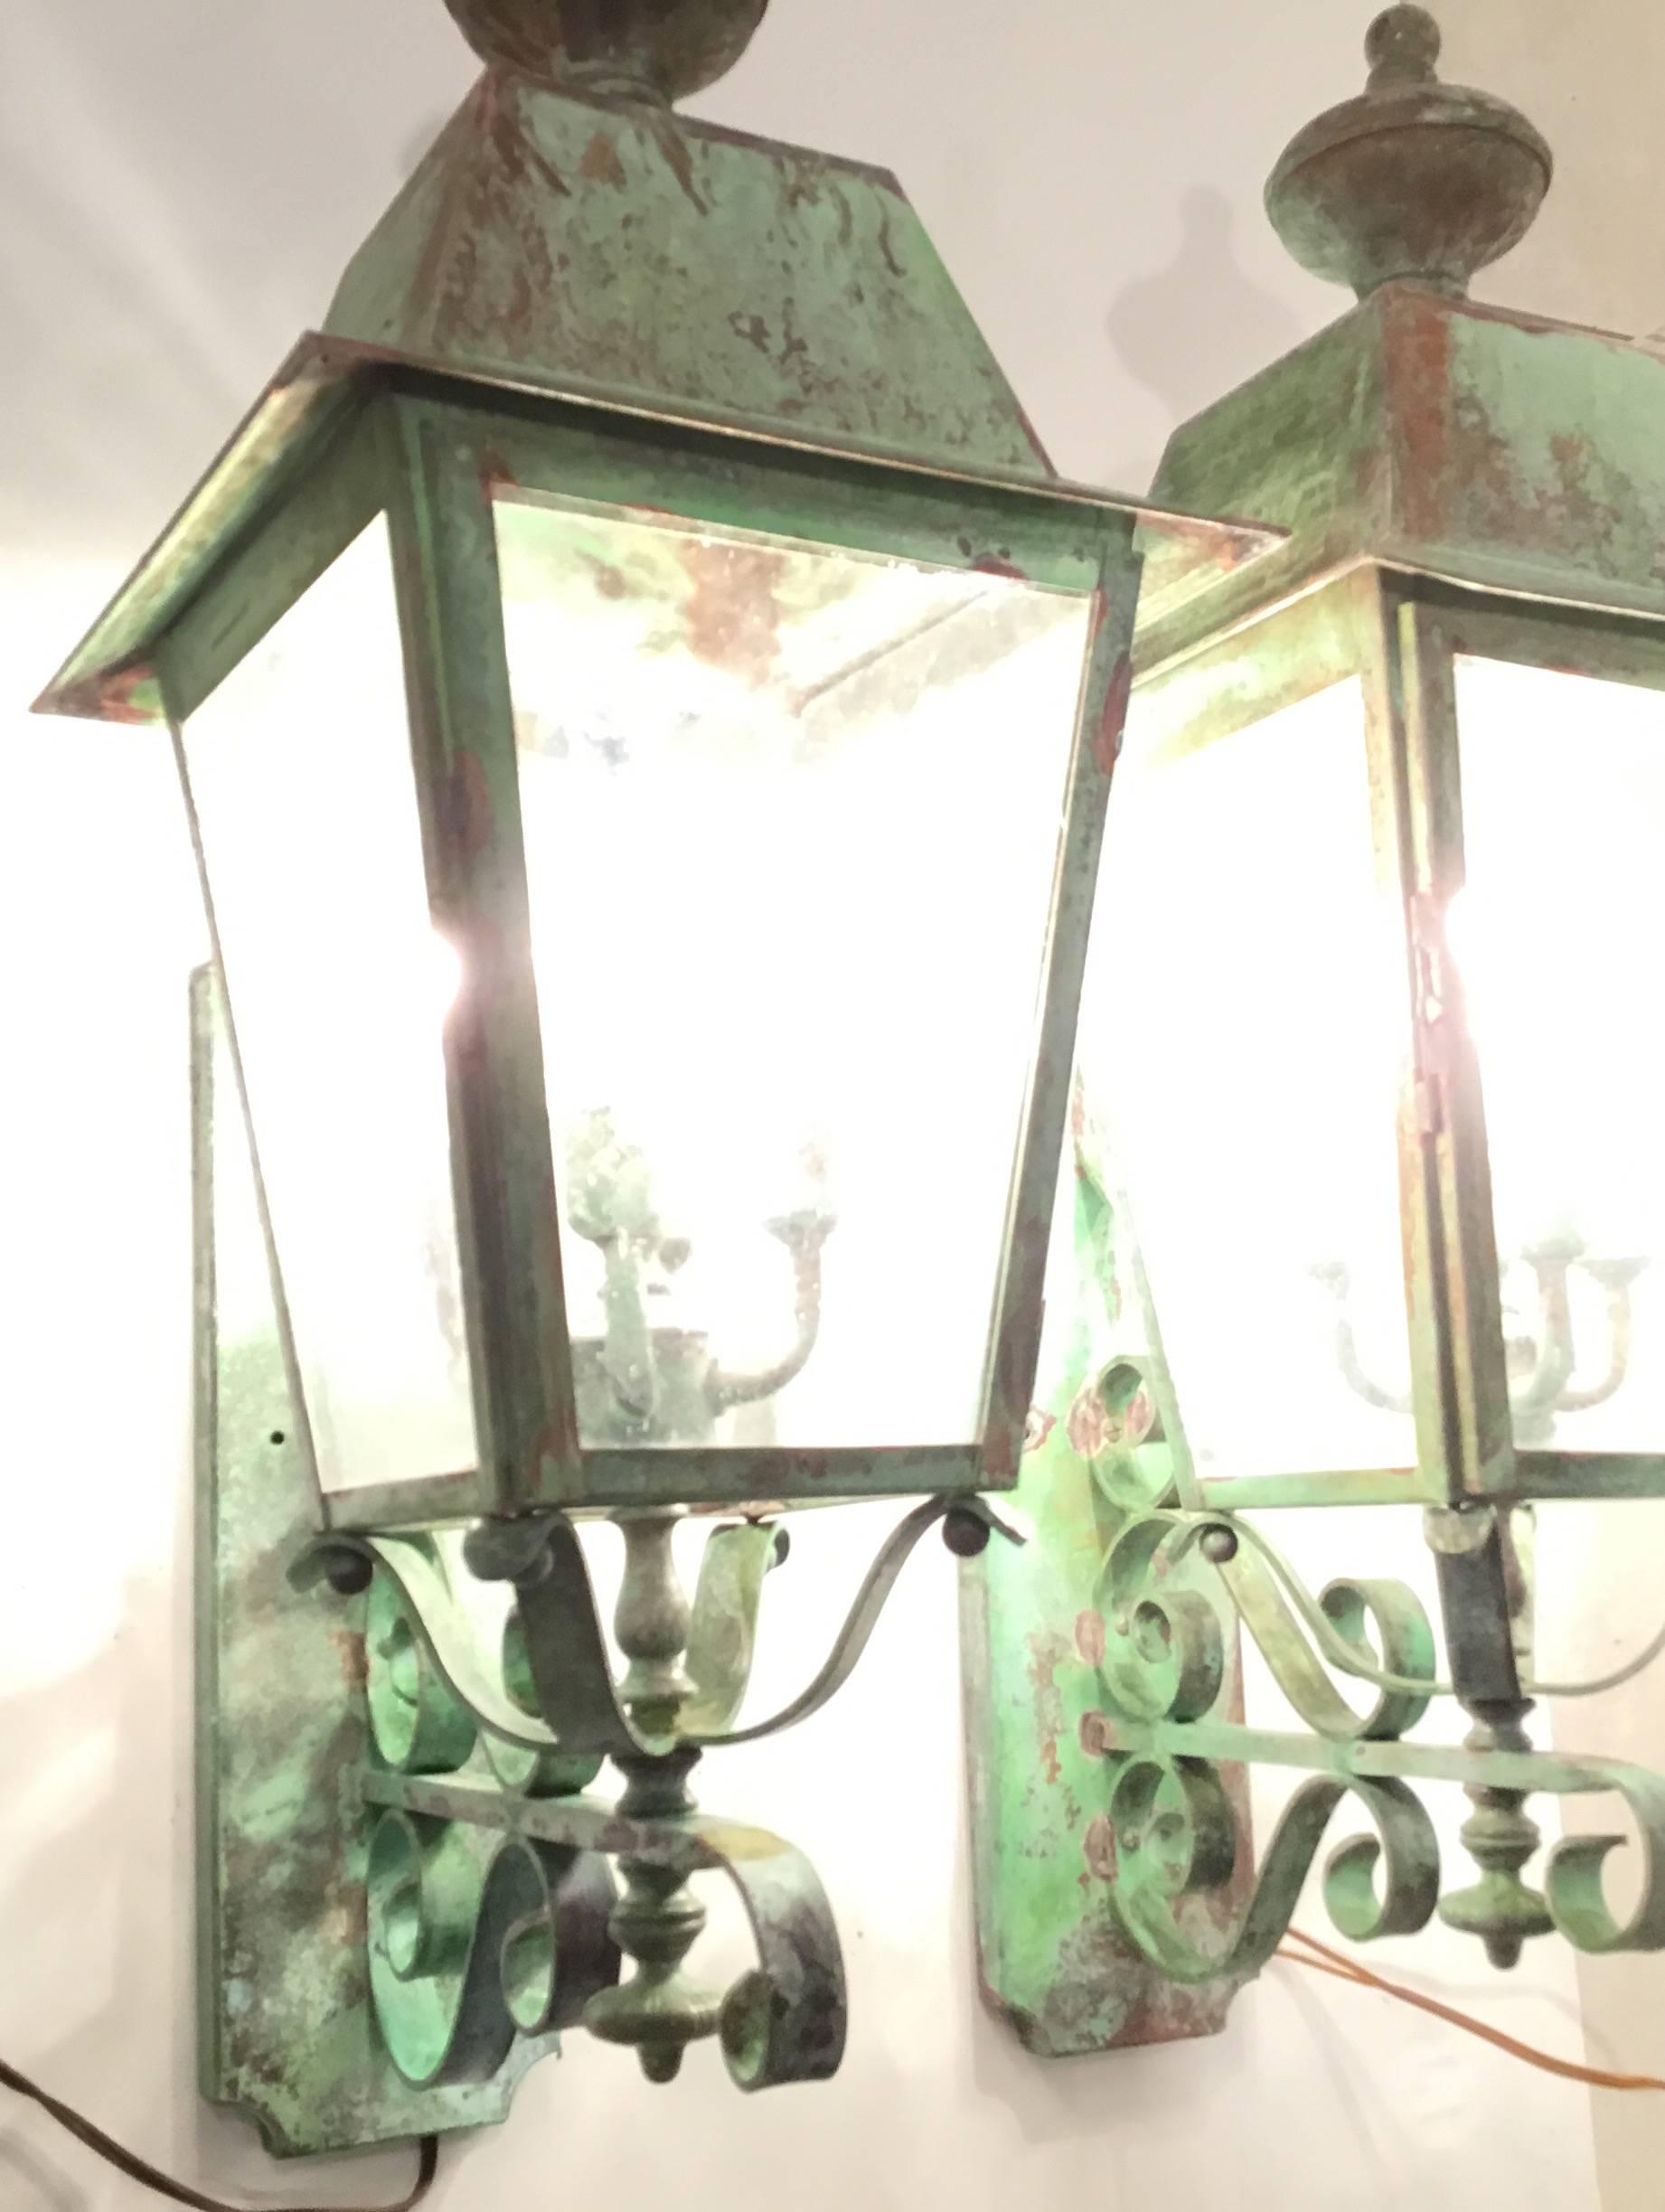 Impressive pair of wall lantern, made of brass and copper, beautiful design of back brackets with scrolling motif, including five 40/watt light cluster.
On each light.
Great oxidized patina, could install indoor or outdoor.
Electrified and ready